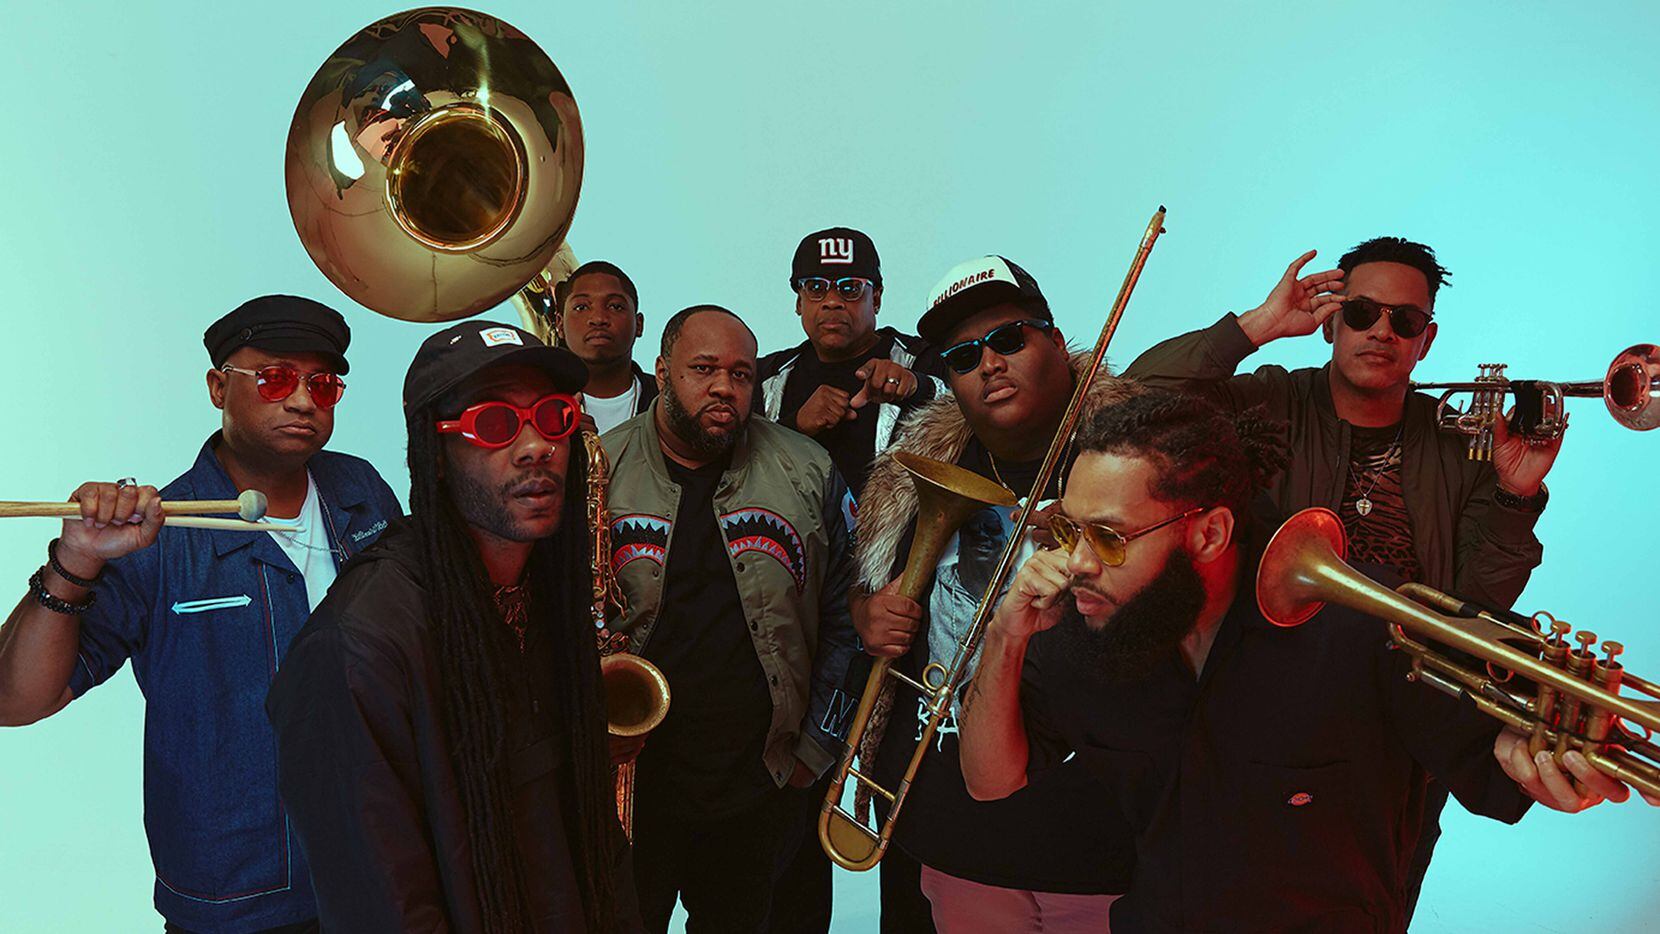 The Soul Rebels are among the acts performing this month at Levitt Pavilion in Arlington.